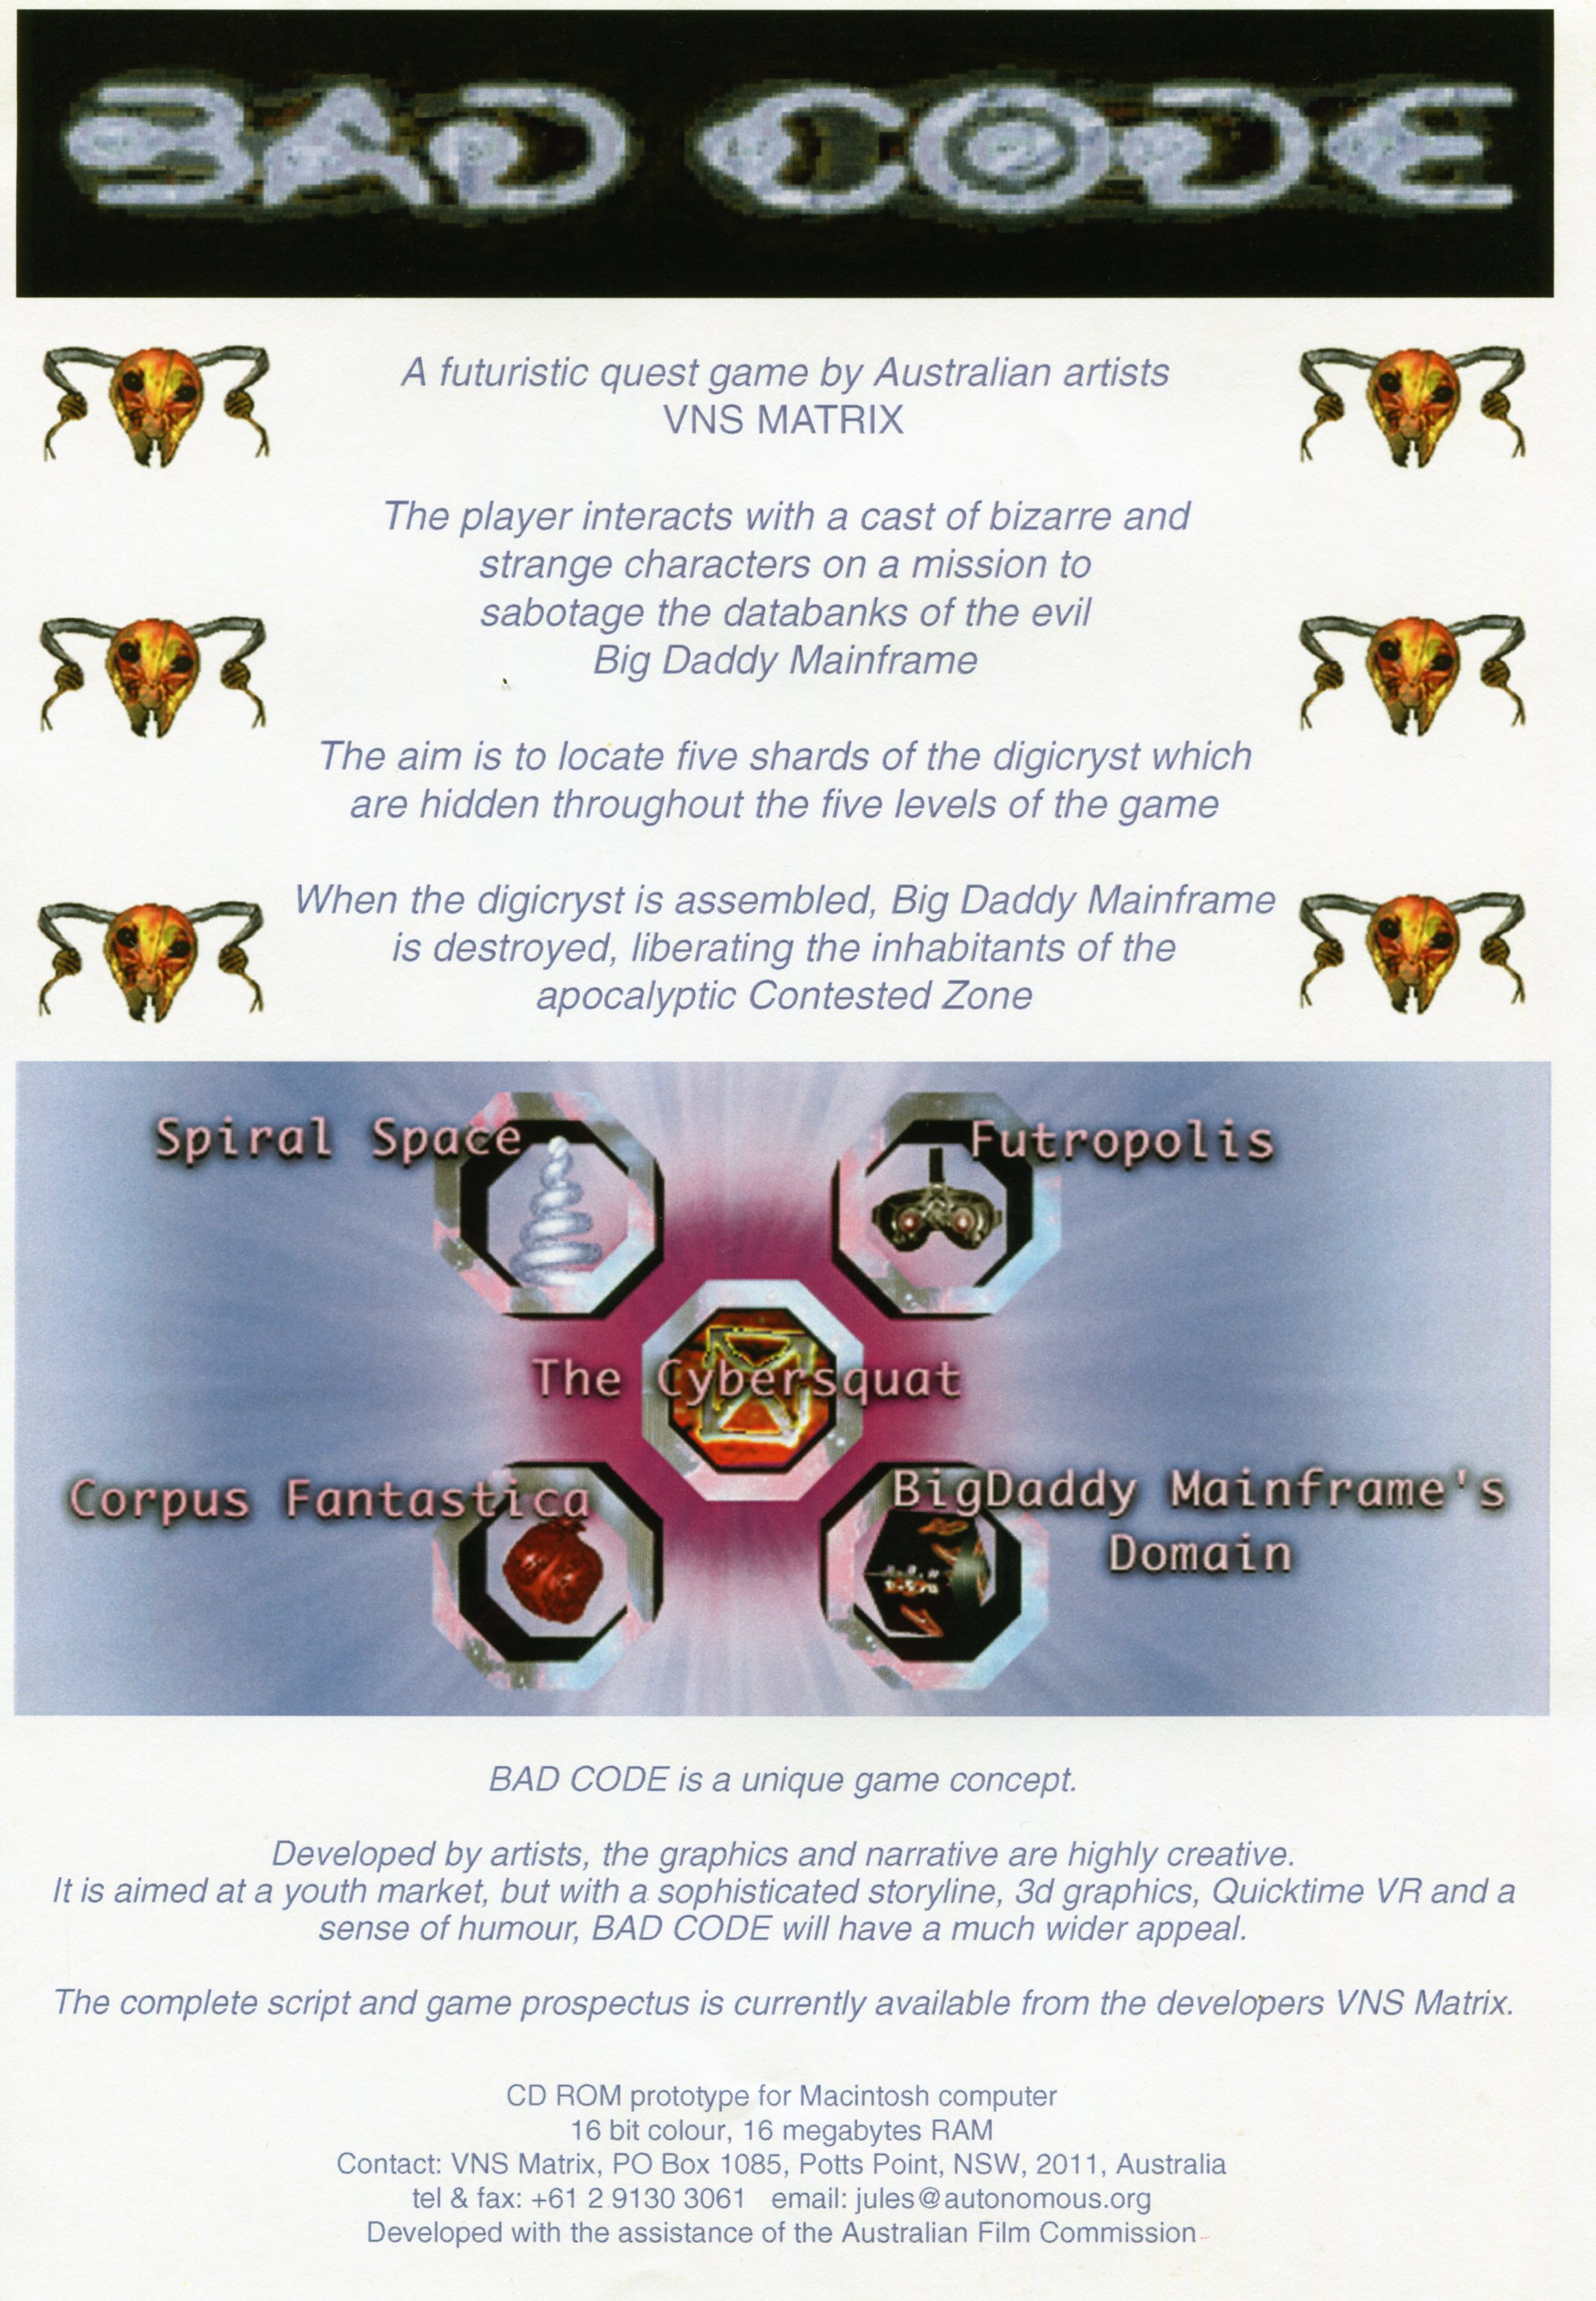 A white poster with a black "Bad Code" header, blue text in the center, and columns of part-deer and part-bug skull icon on both sides. The middle has an image of the Bad Code video game showing icons such as a spiral, a heart, goggles framed.